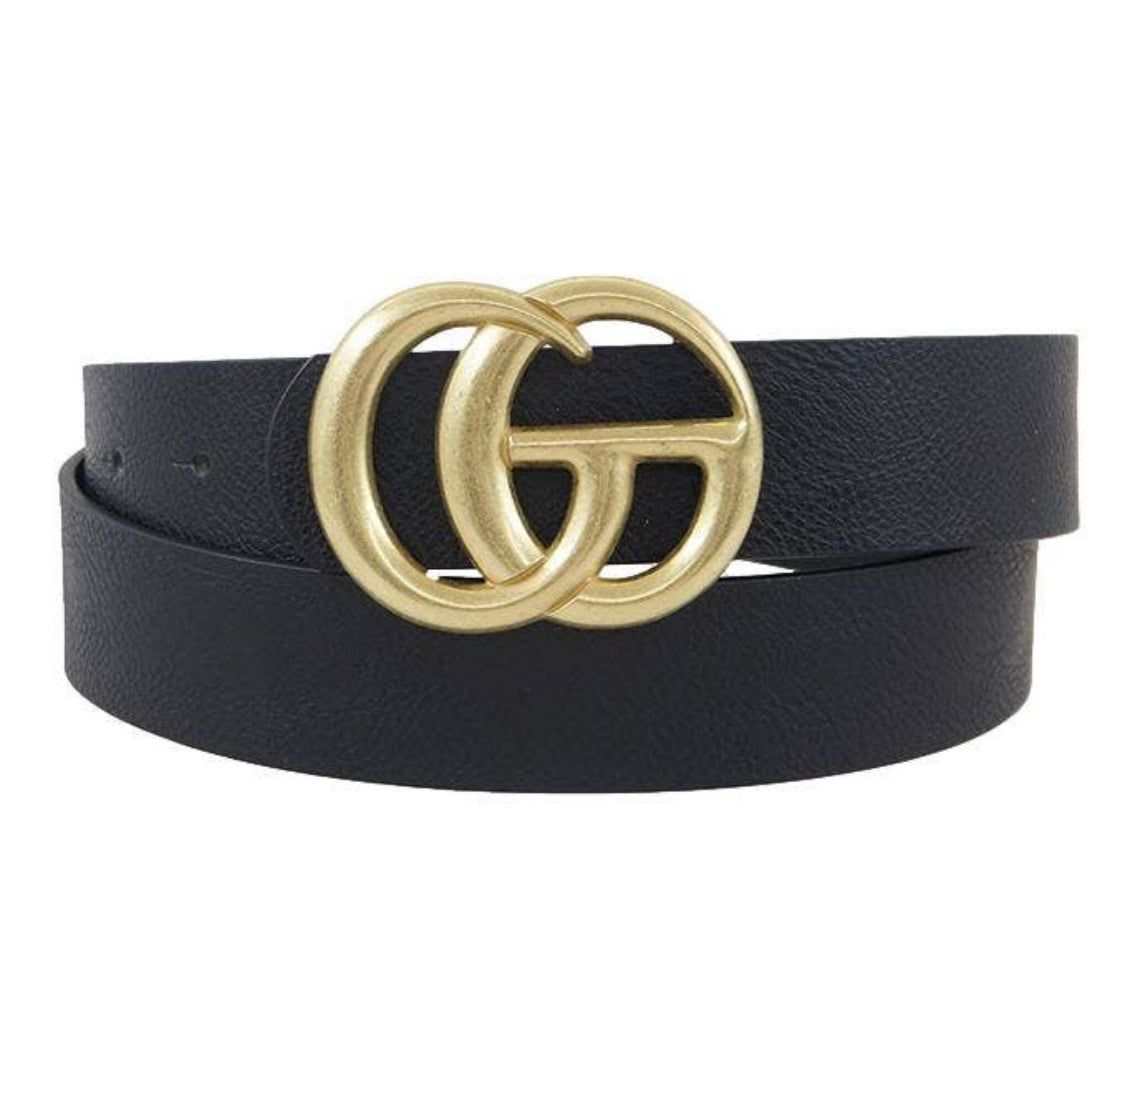 CG Gucci Inspired Belt – Charles & Grace Boutique